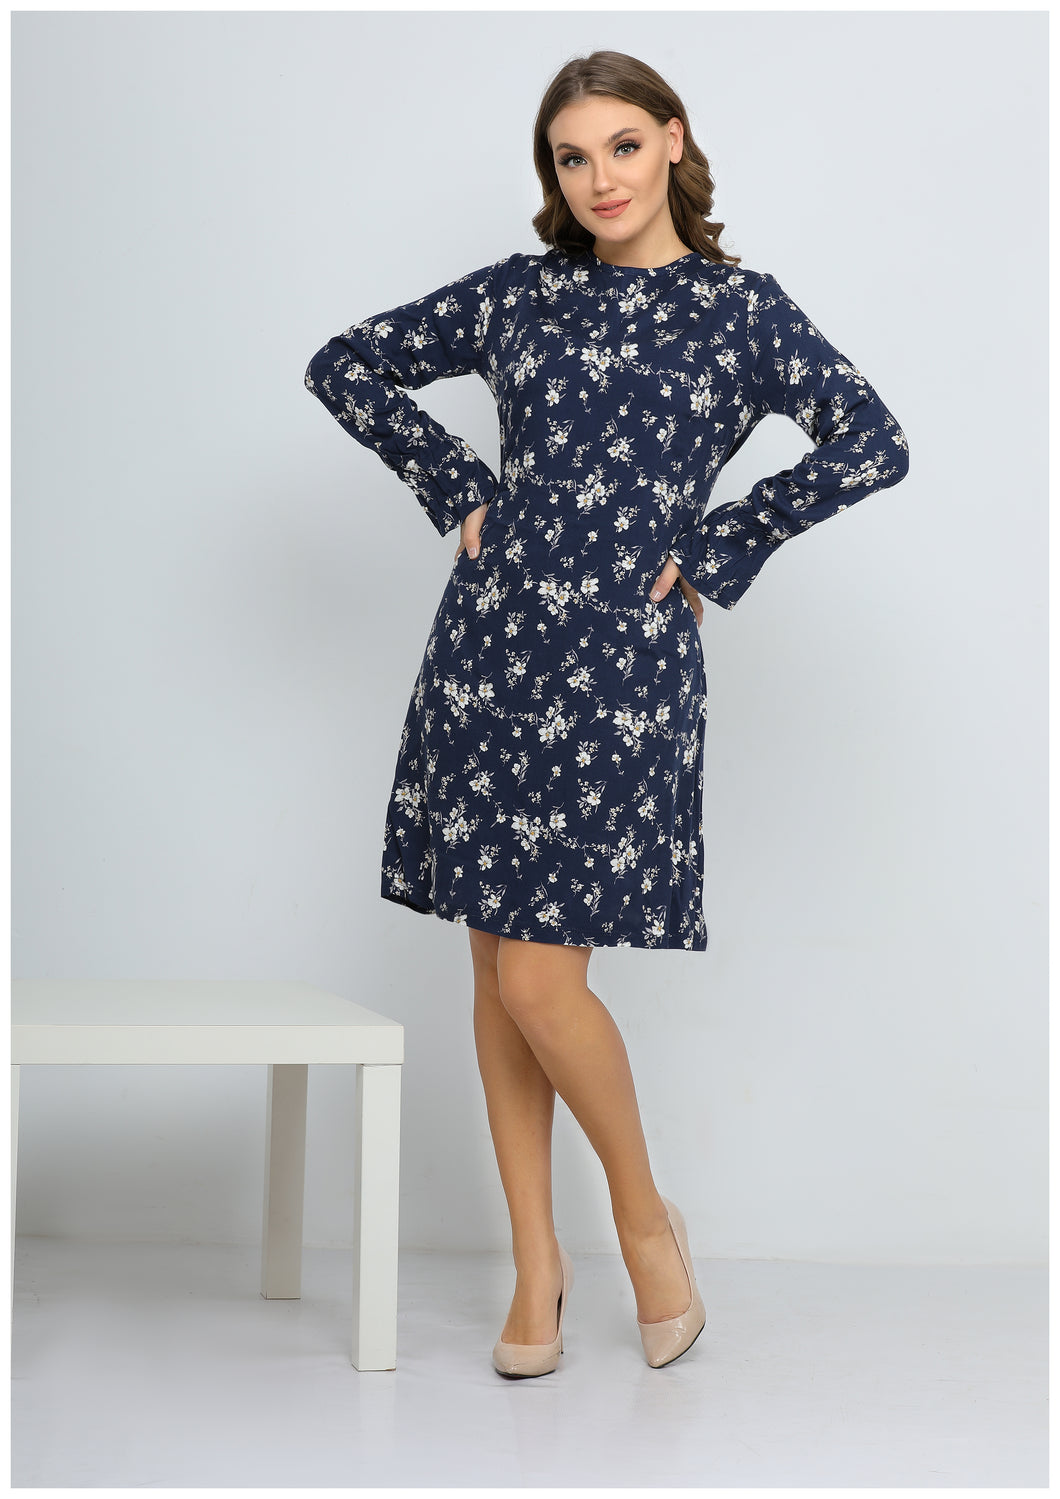 Short navy blue dress with long sleeves